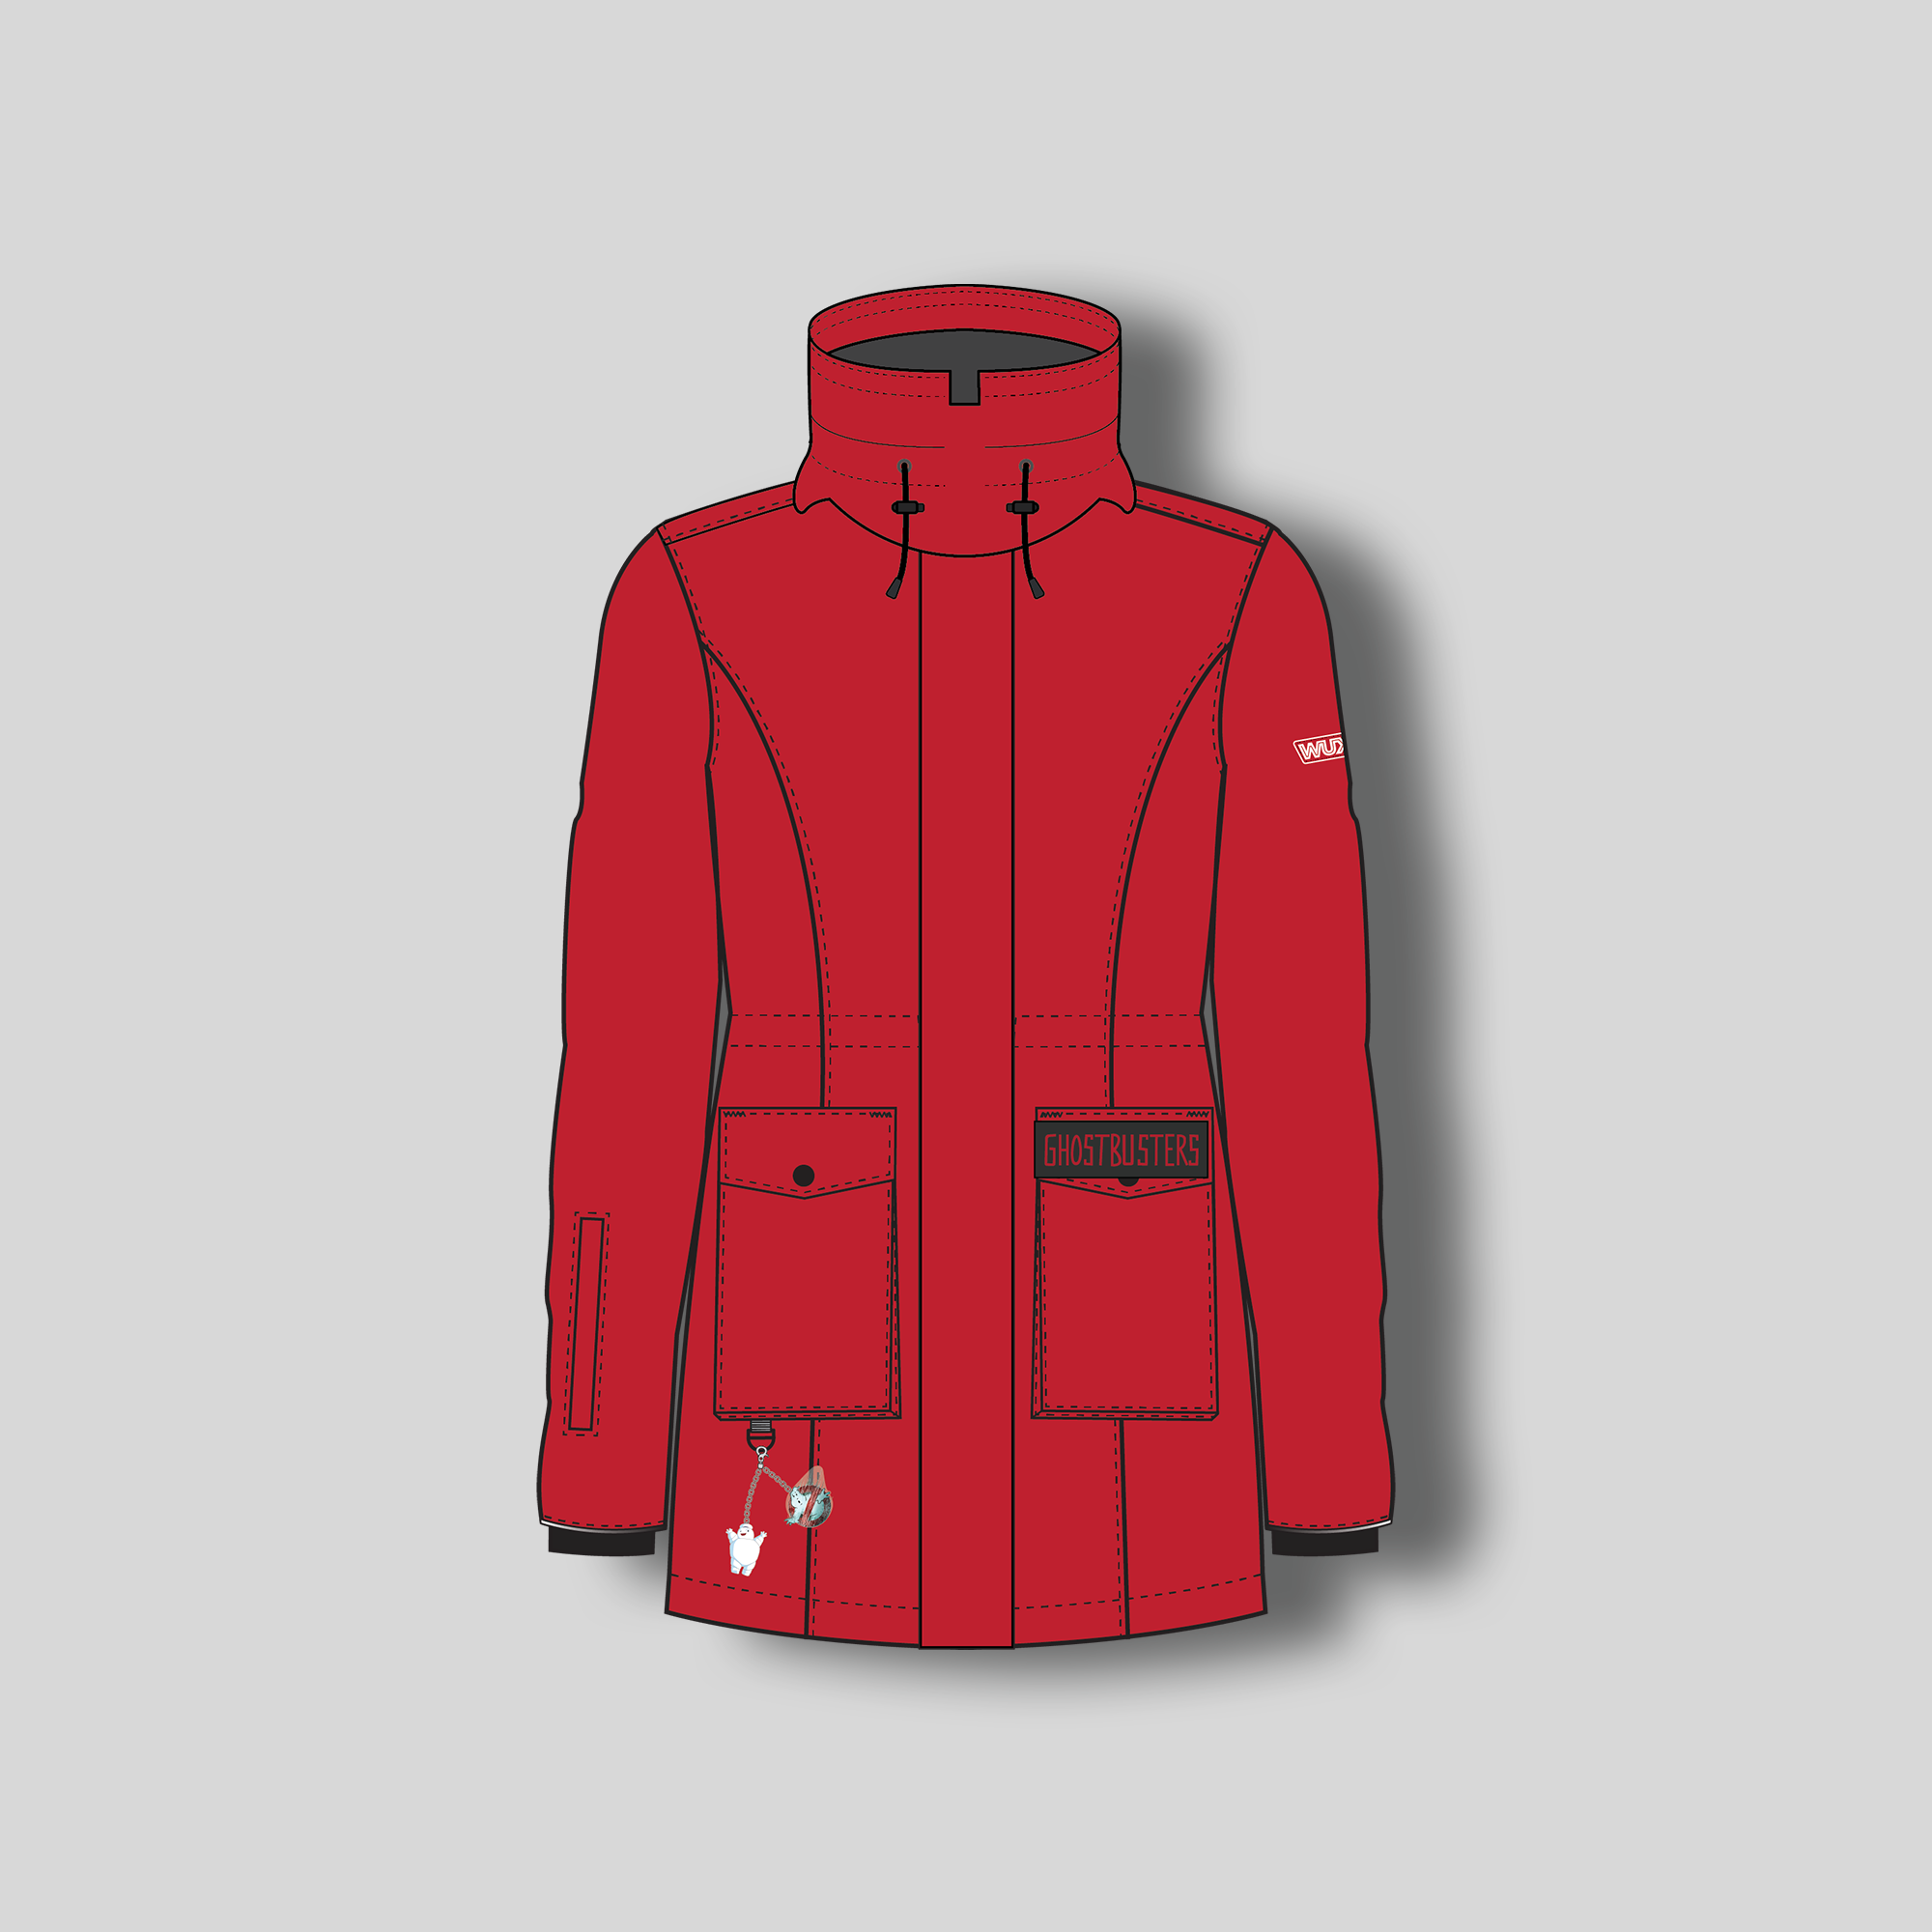 Wuxly x Ghostbusters Doe Parka Red